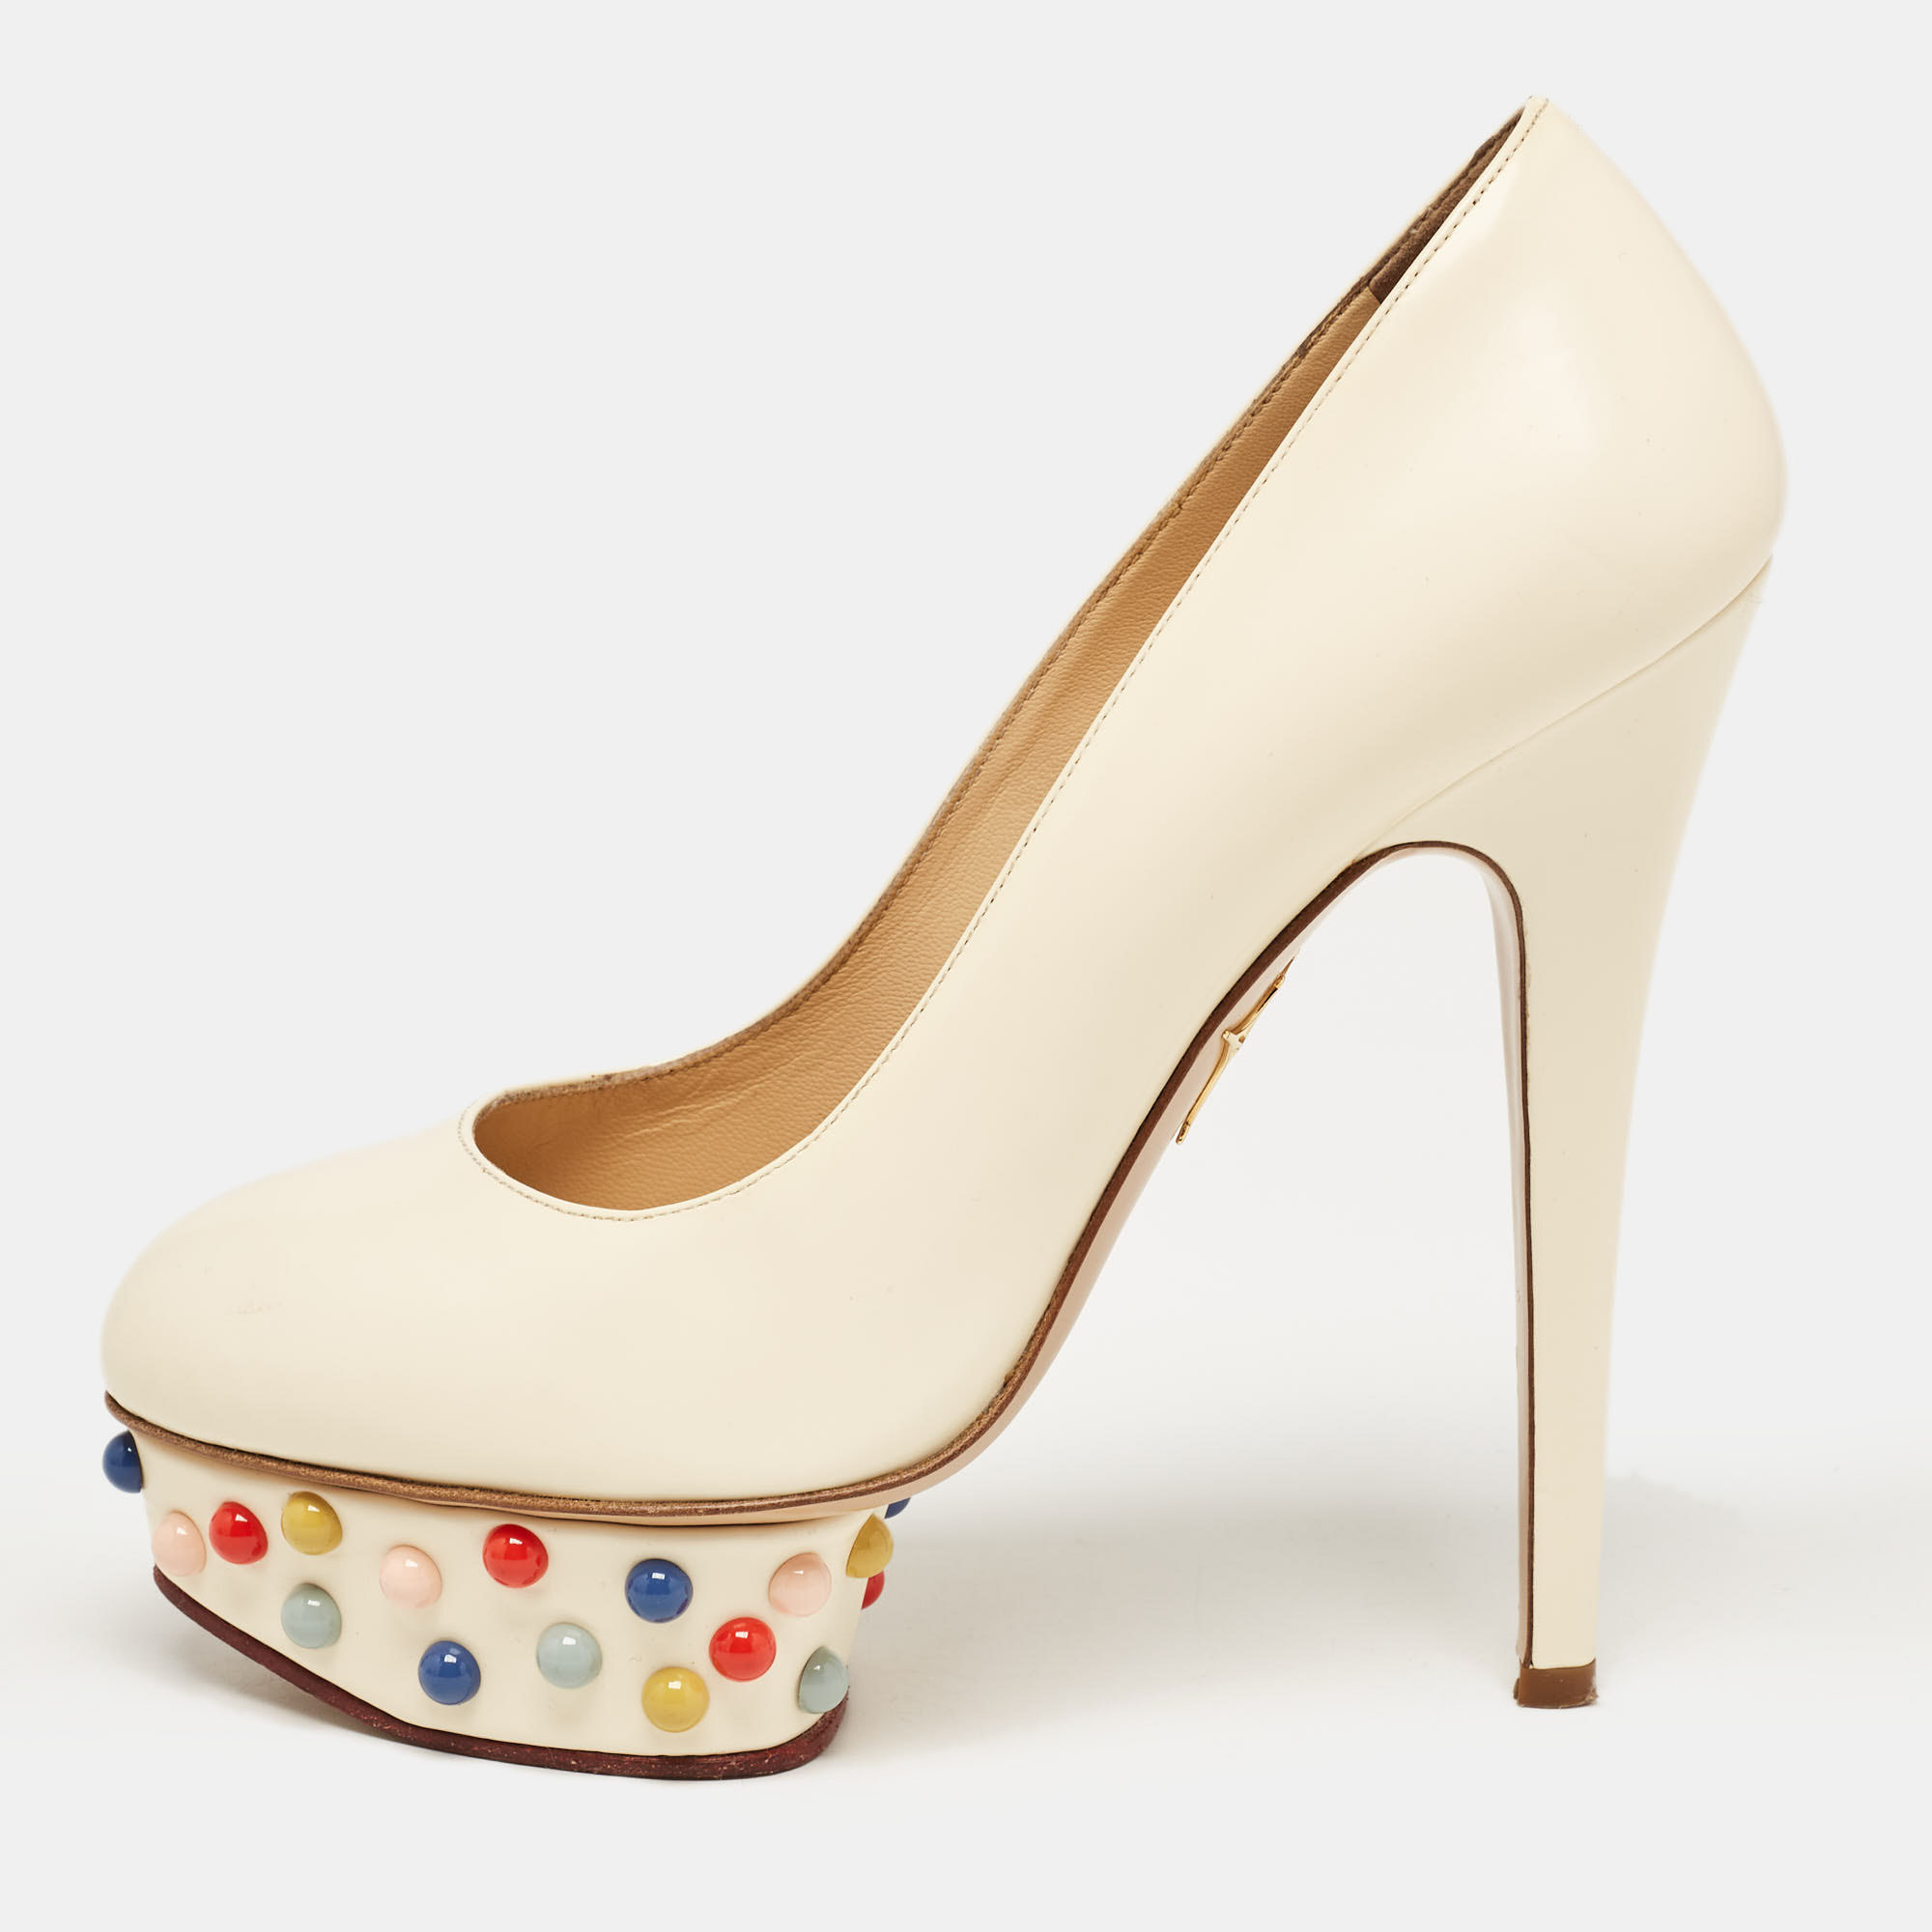 Charlotte olympia off white leather embellished dolly platform pumps size 37